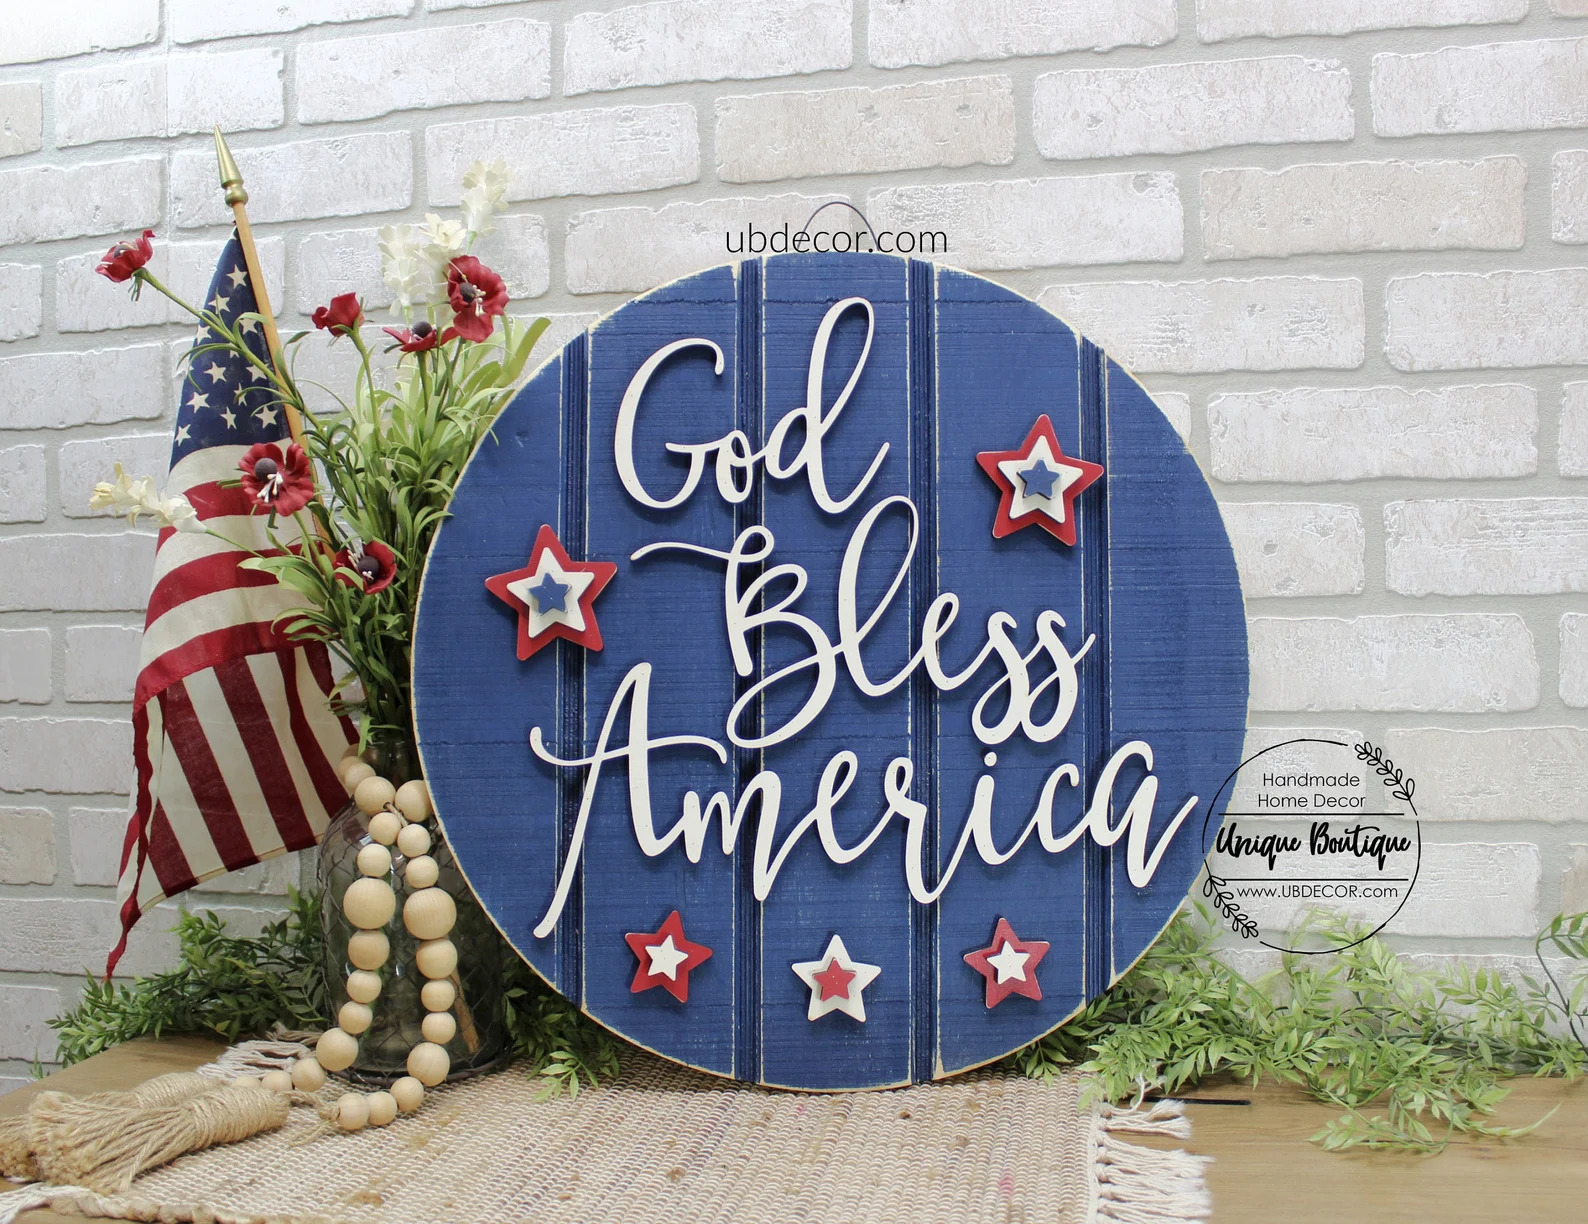 18 Beautiful 4th of July Wreath Designs That Do Make A Statement